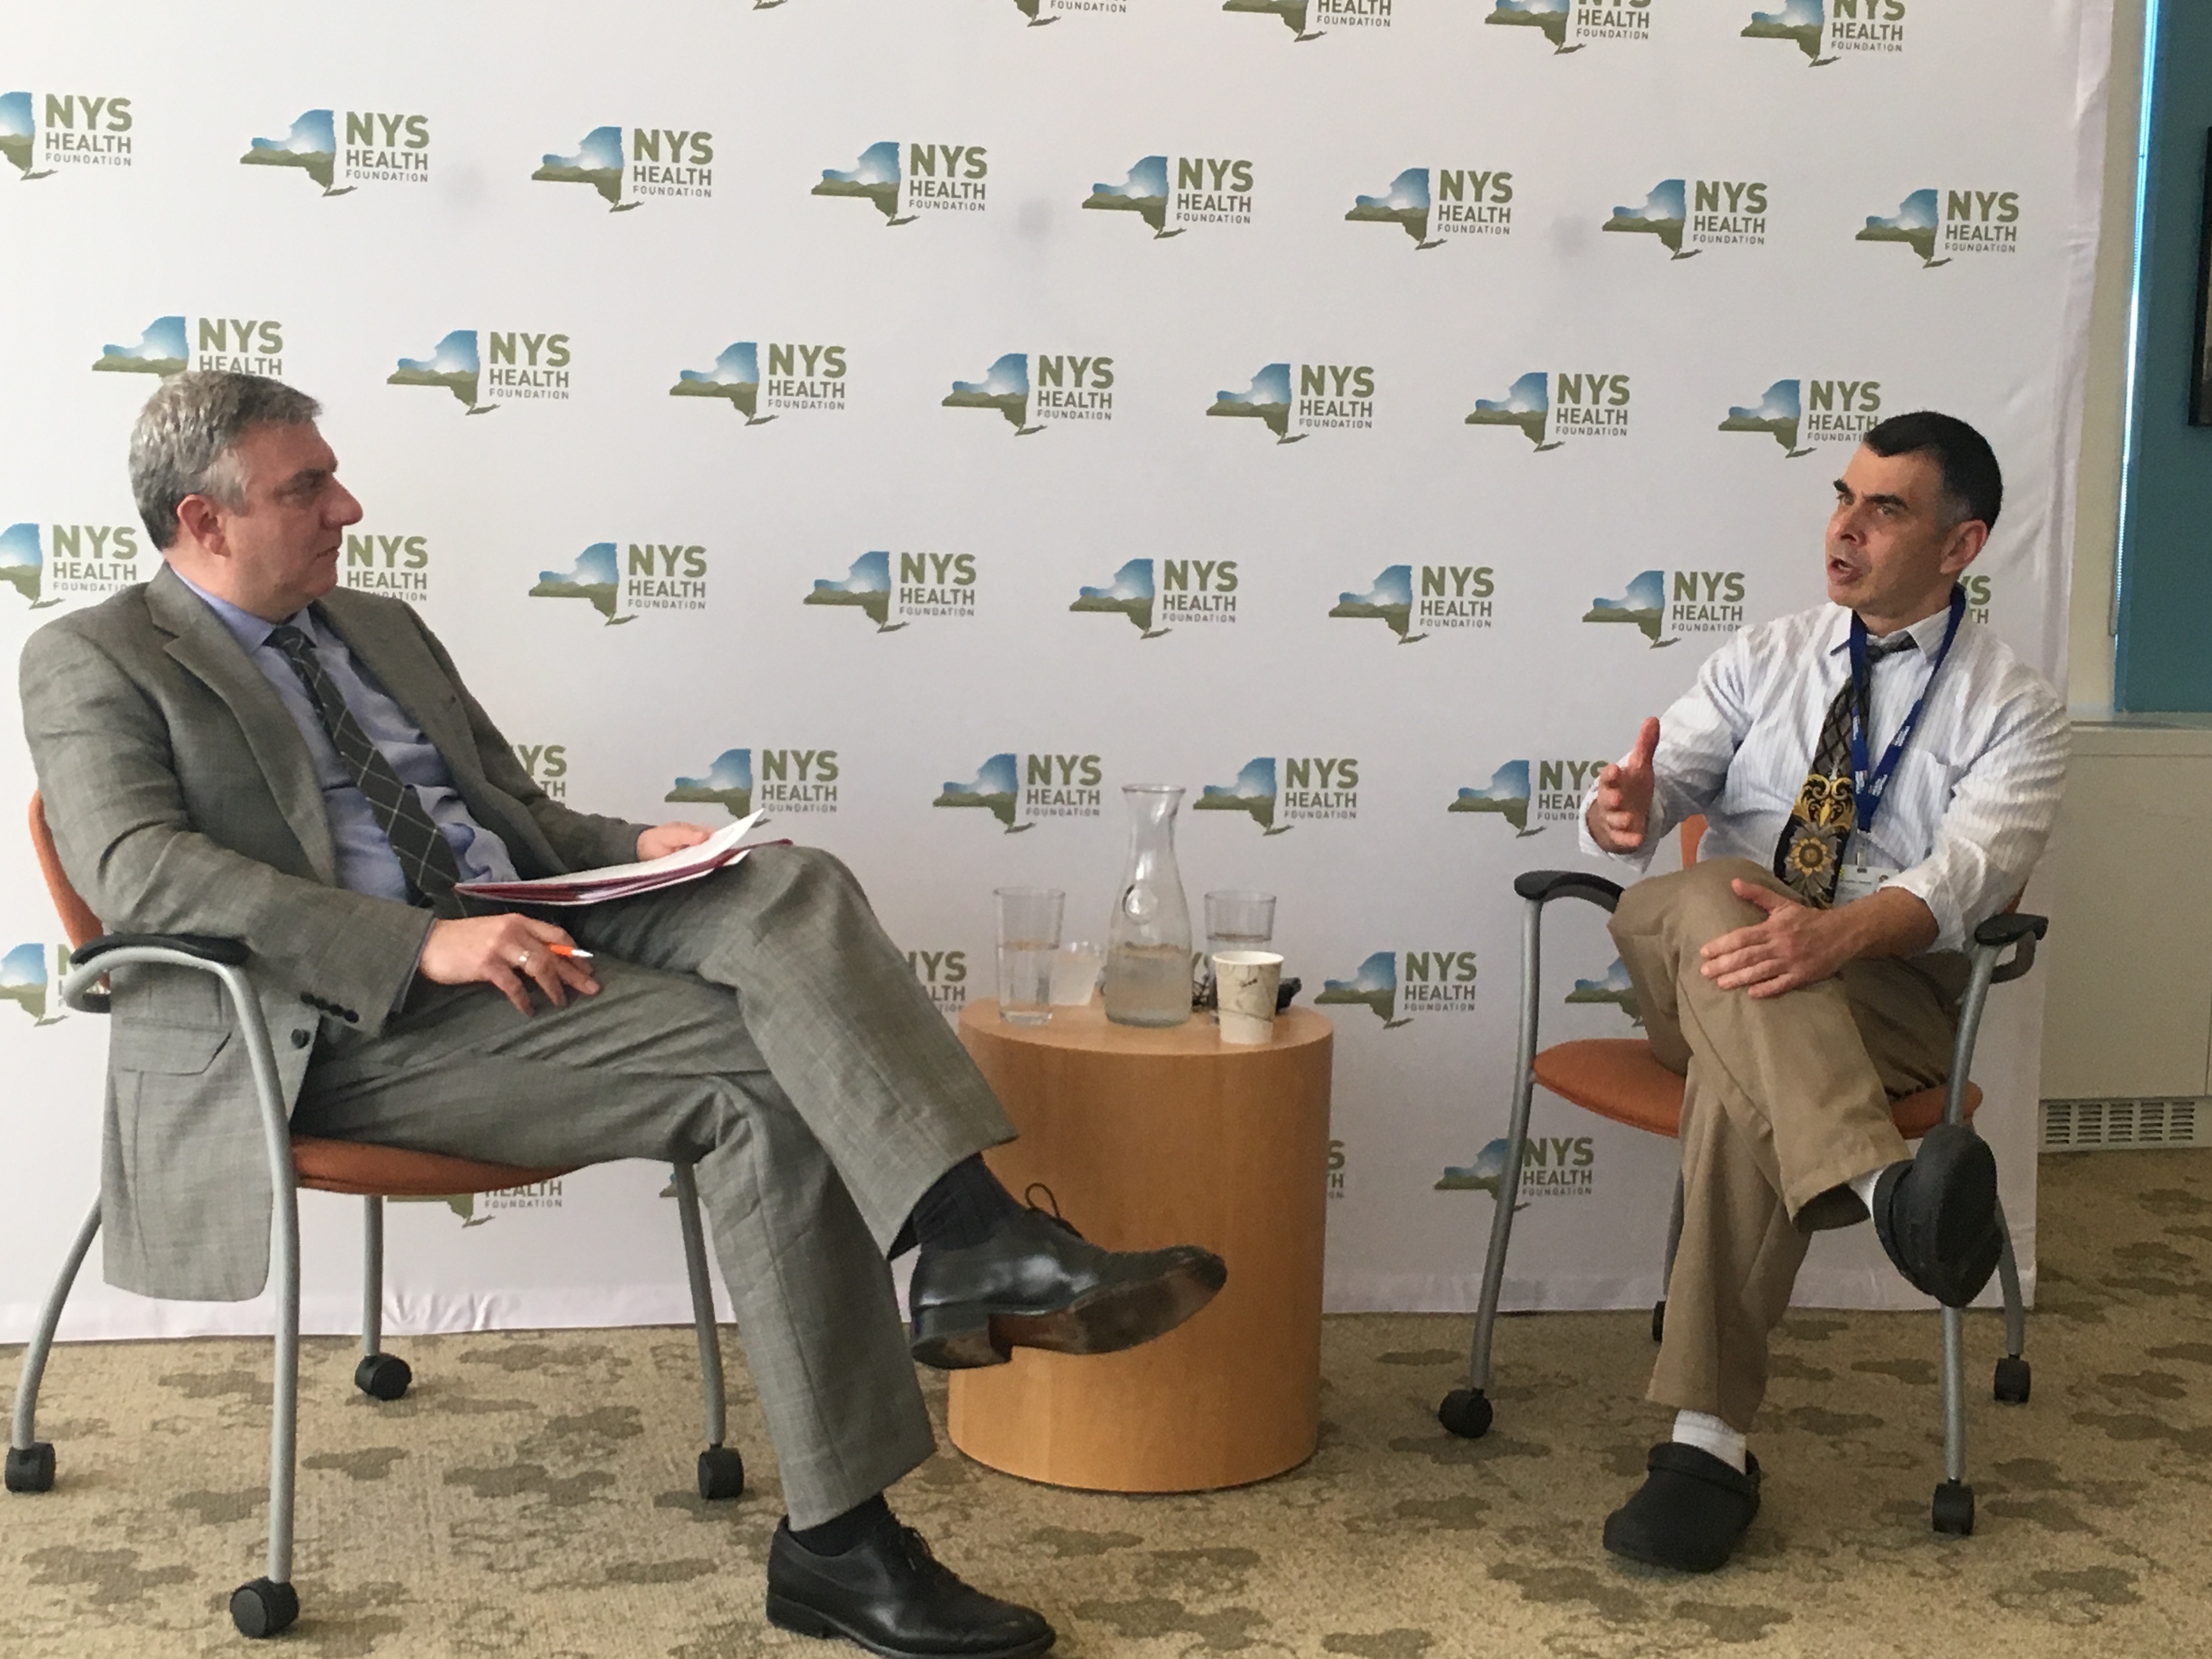 NYHealth President and CEO David Sandman talks with NYC Health + Hospitals CEO Mitchell Katz at the front of a conference room.